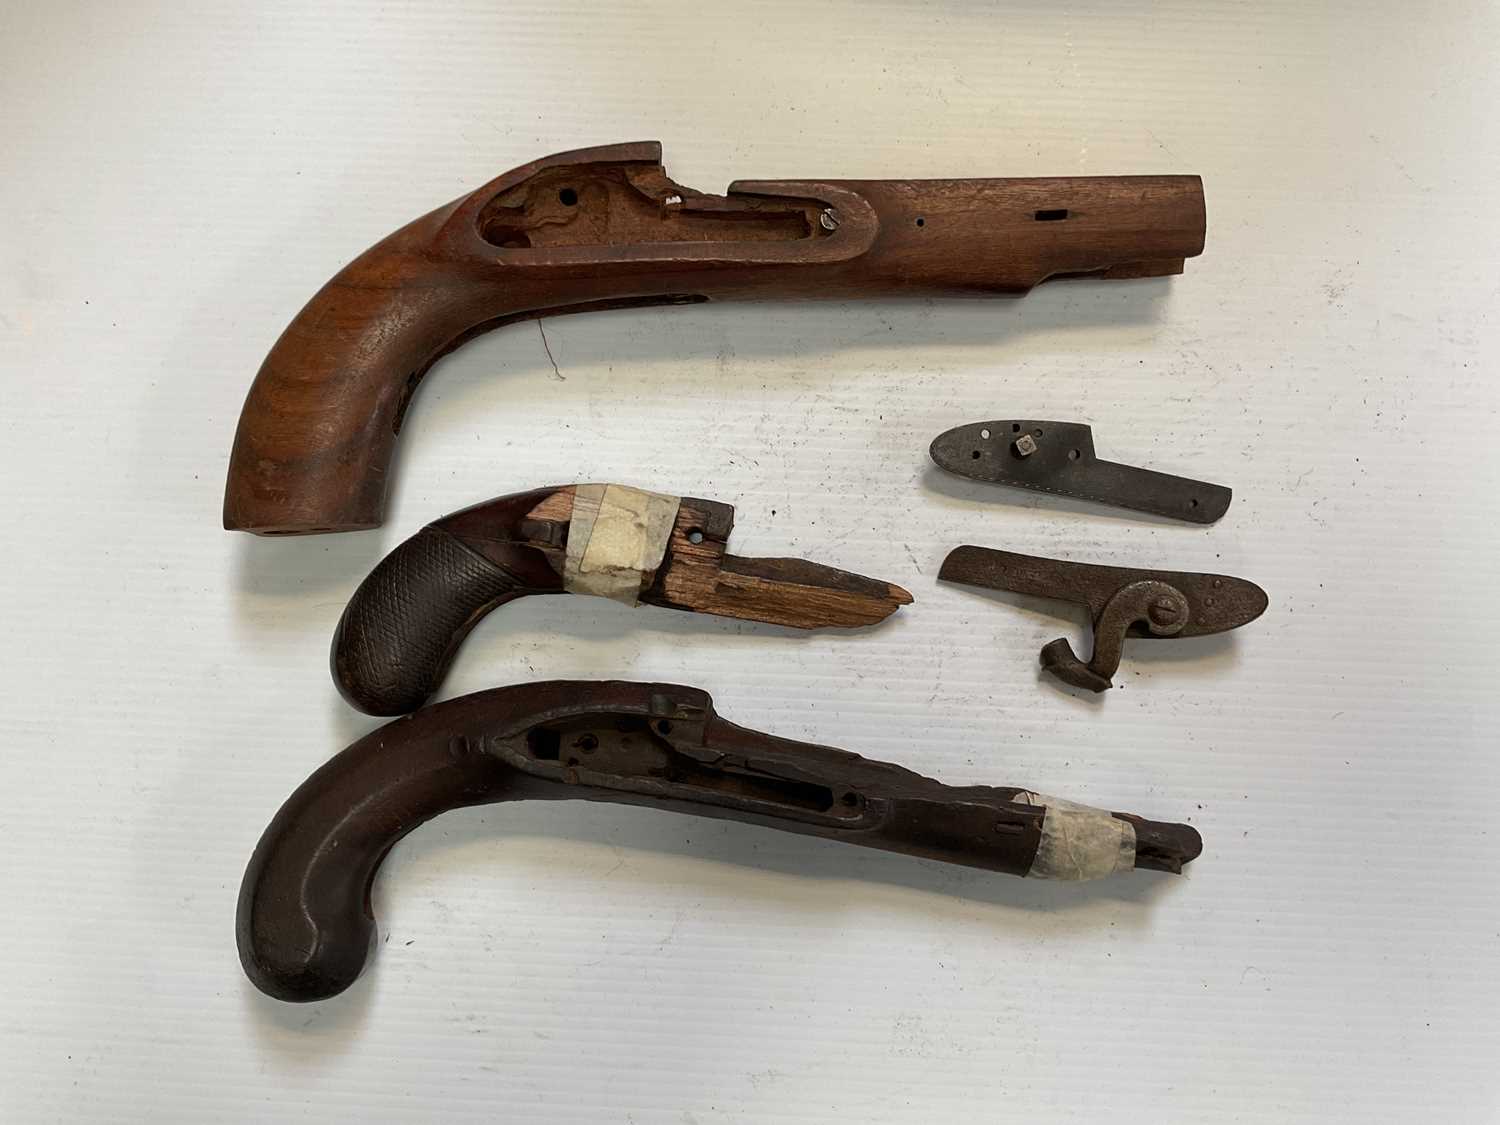 Five percussion pistol stocks with barrels, locks missing, also a small quantity of parts of - Image 4 of 4